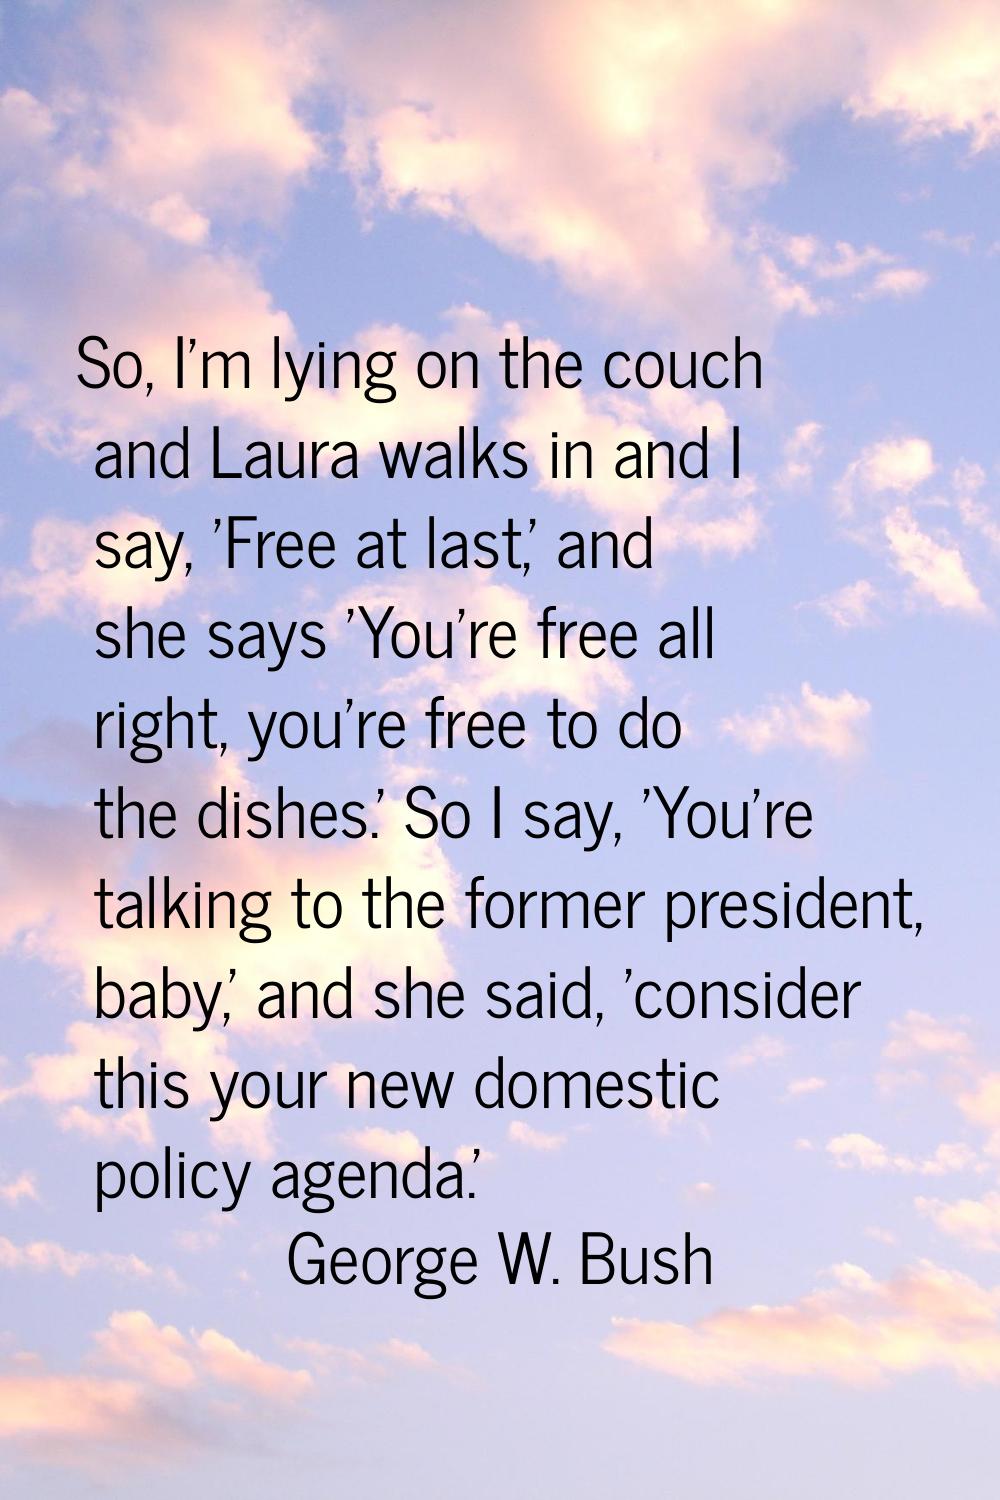 So, I'm lying on the couch and Laura walks in and I say, 'Free at last,' and she says 'You're free 